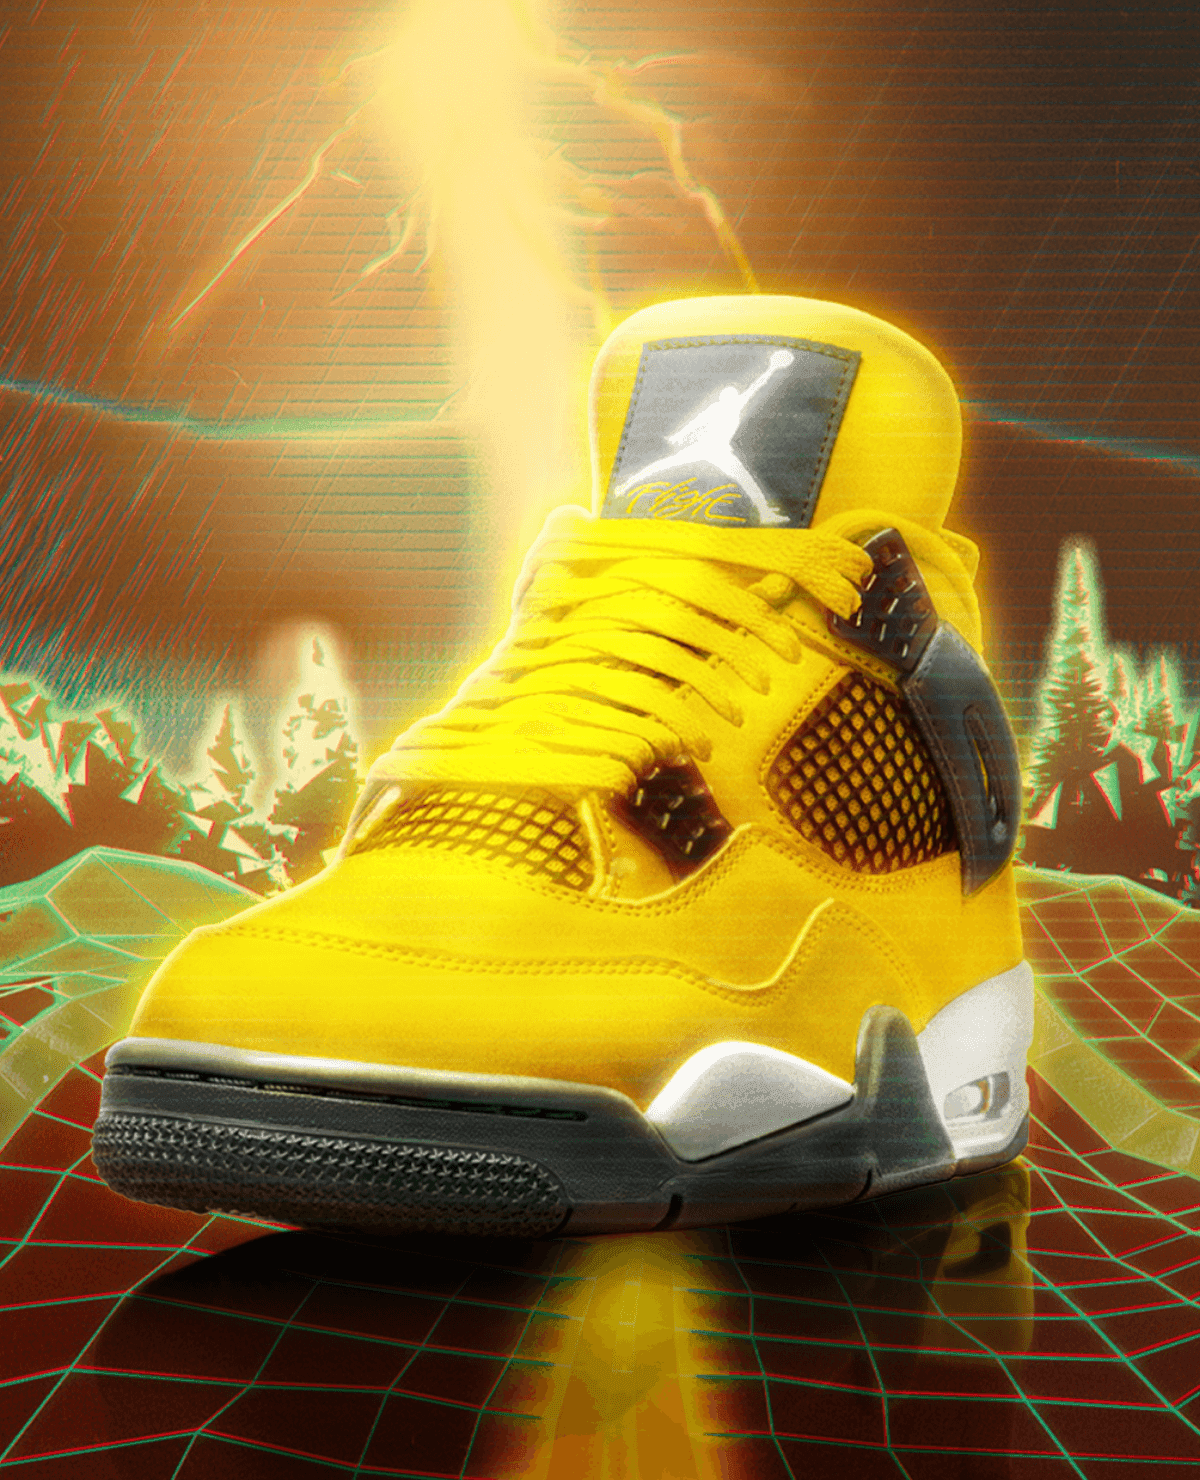 Yellow Jordan 4 Sneakers with rendered lightning background